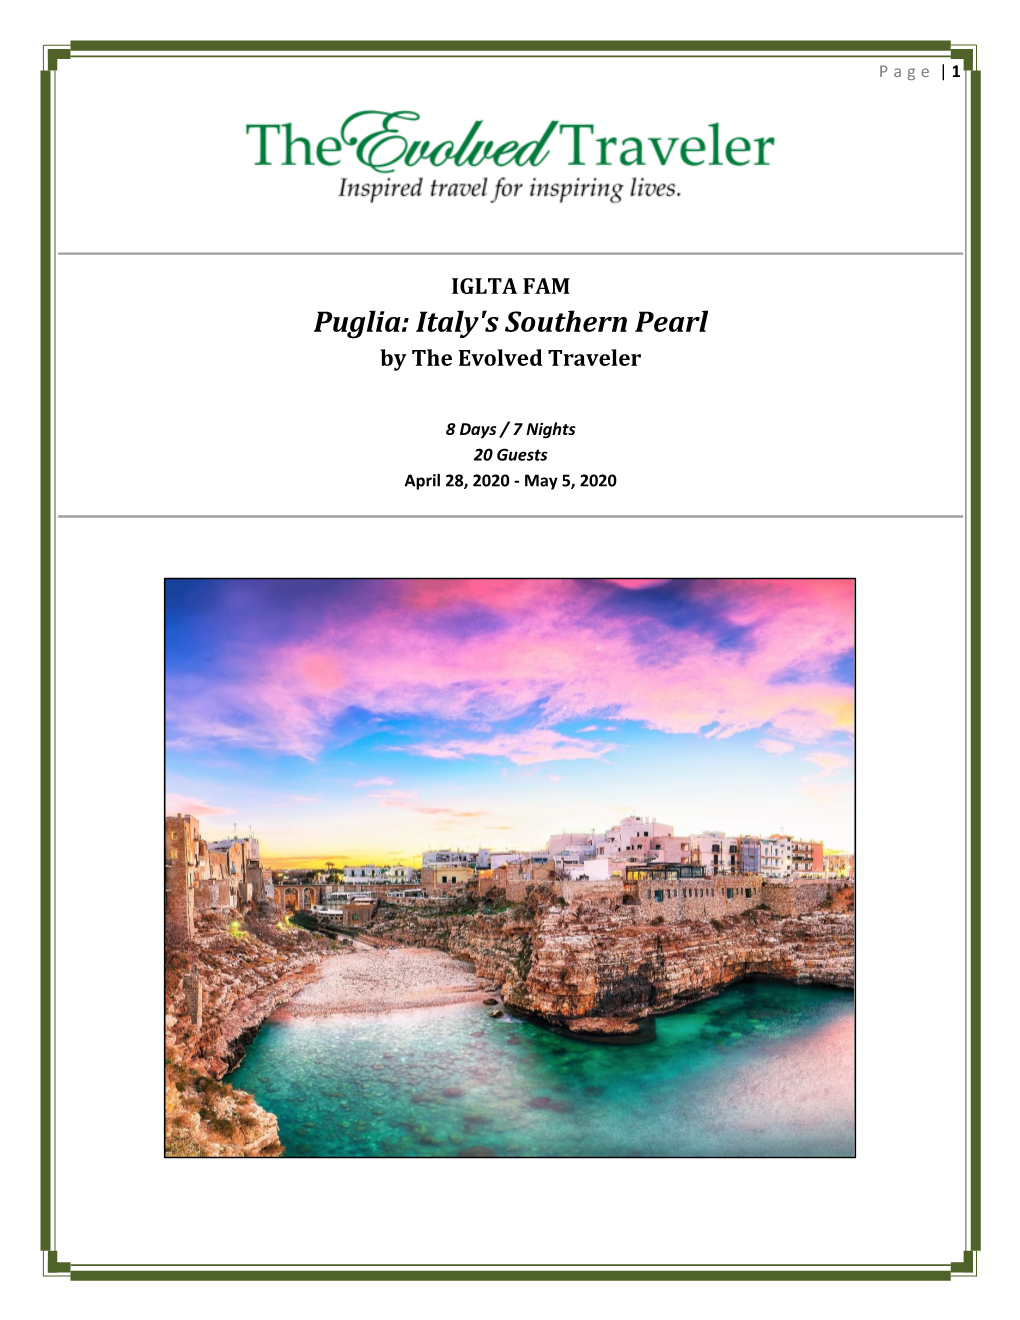 Puglia: Italy's Southern Pearl by the Evolved Traveler